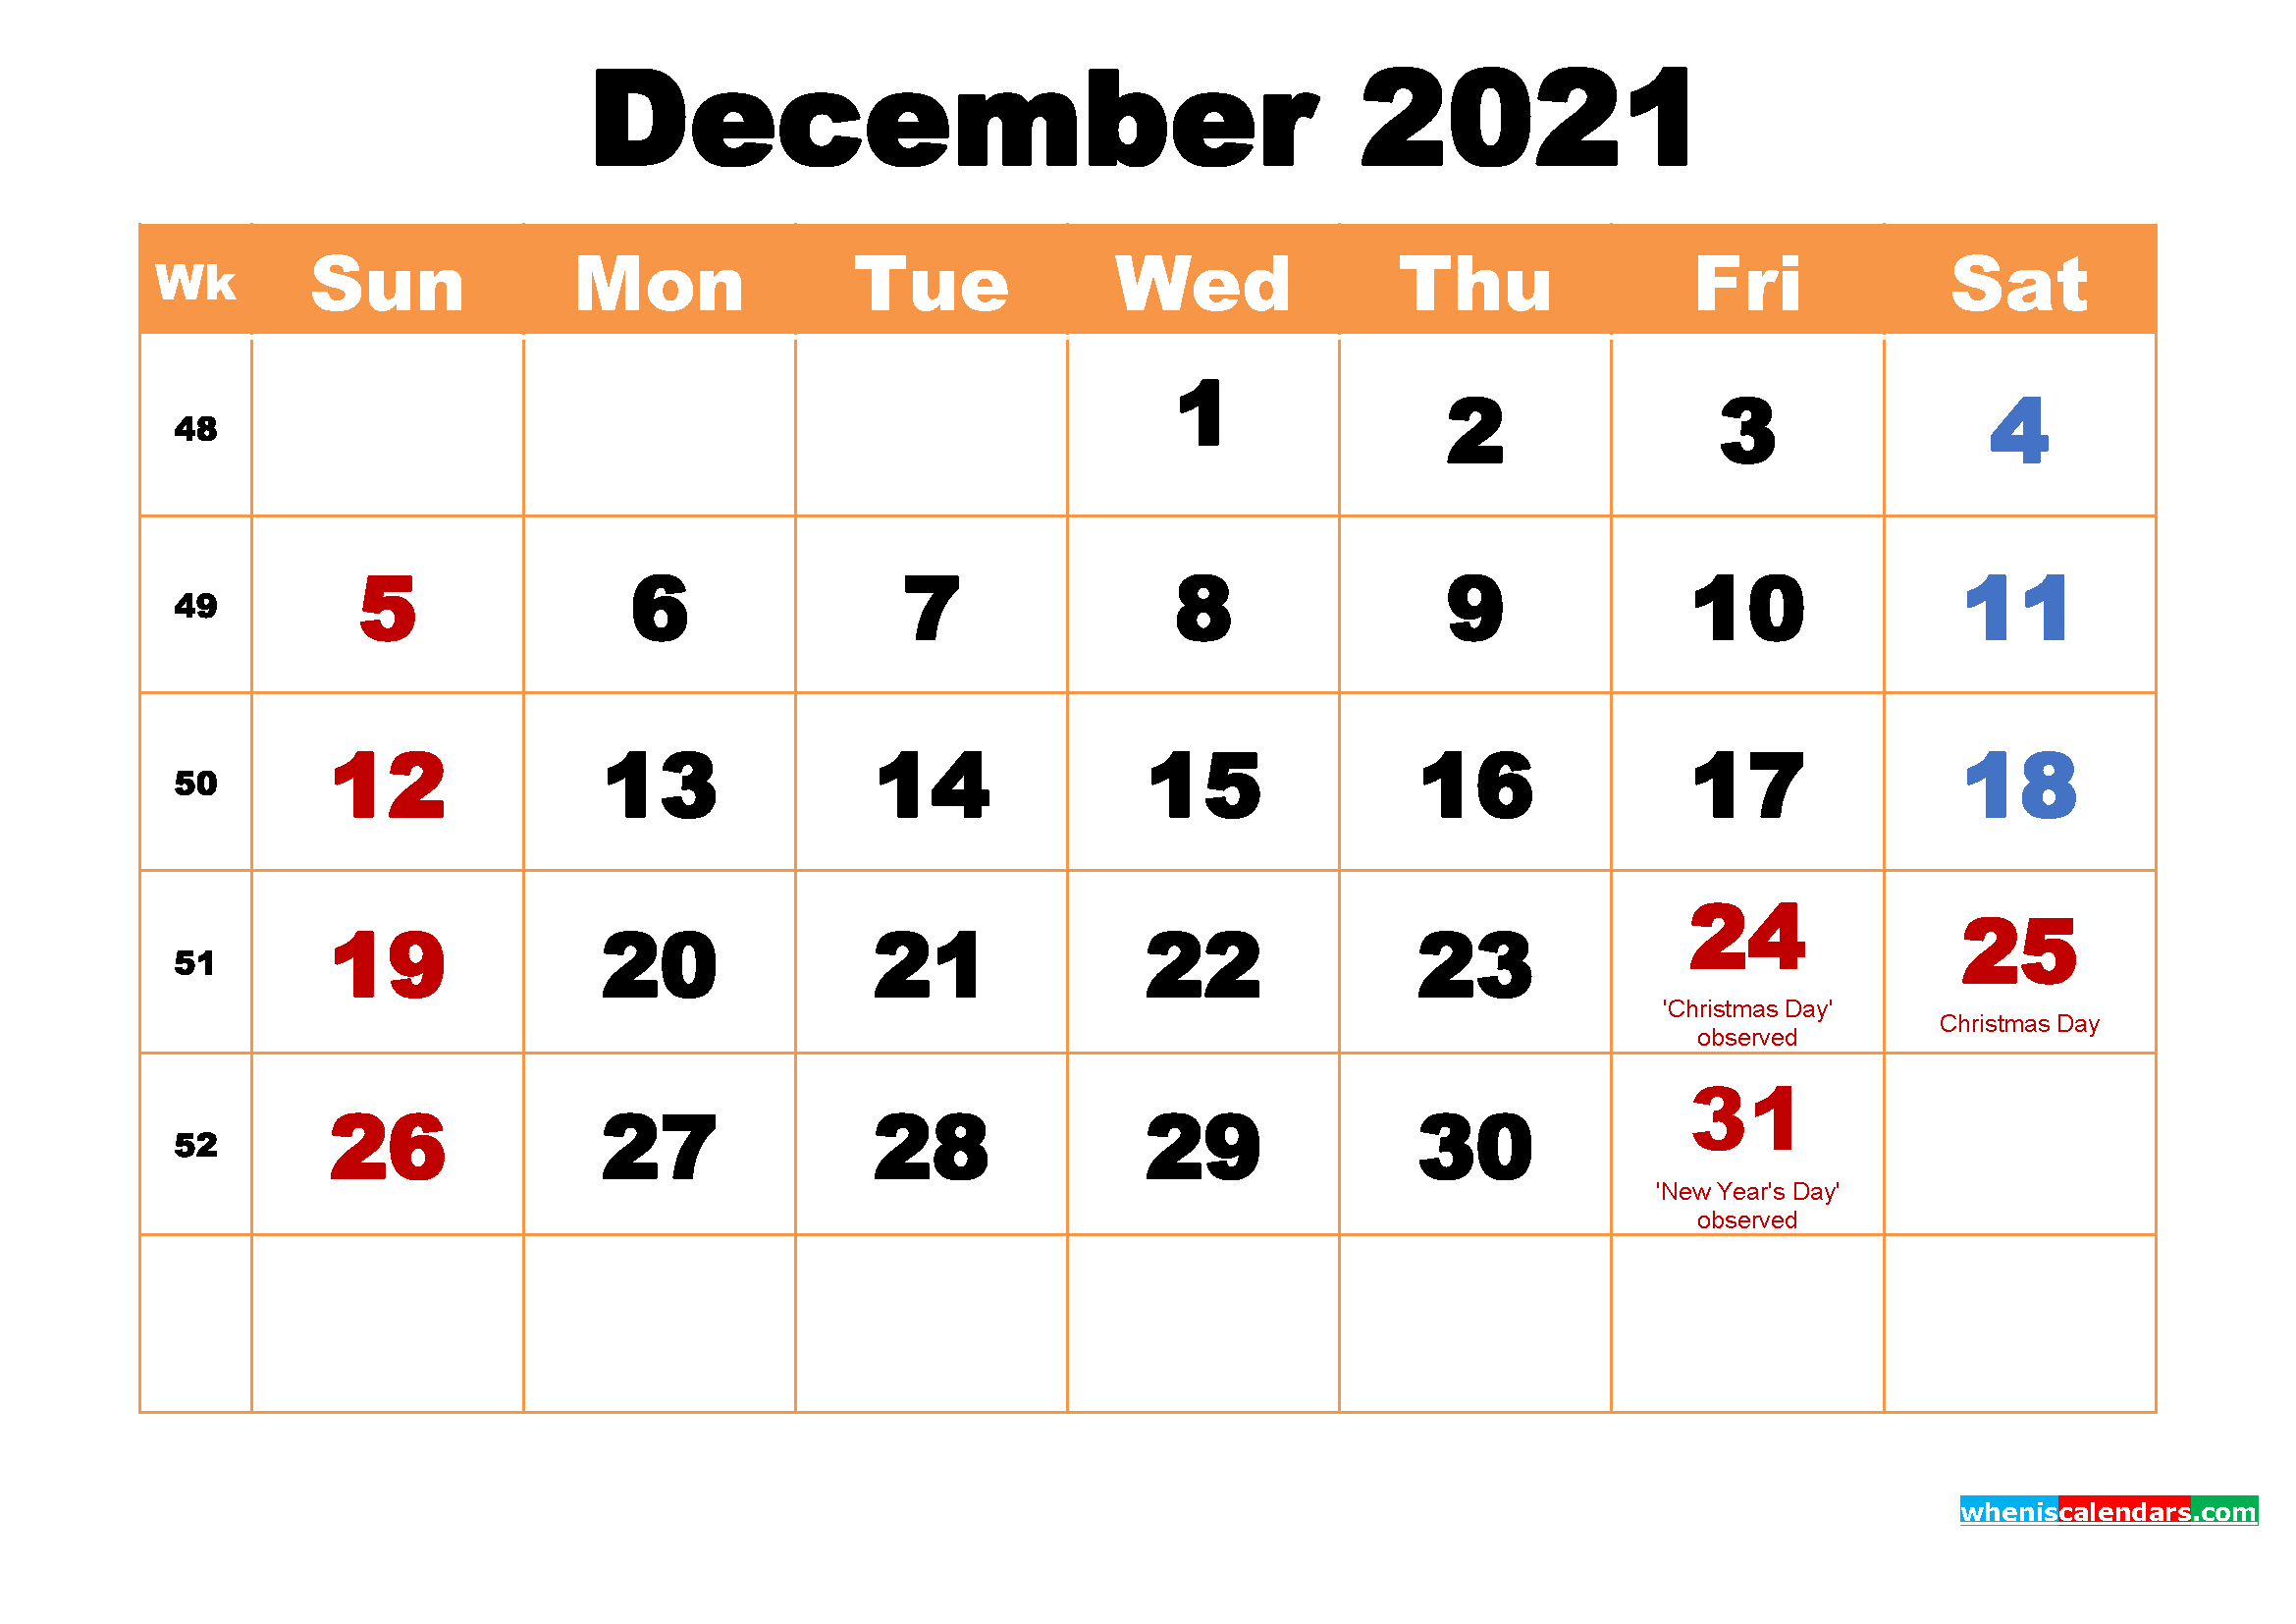 December 2021 Printable Monthly Calendar with Holidays